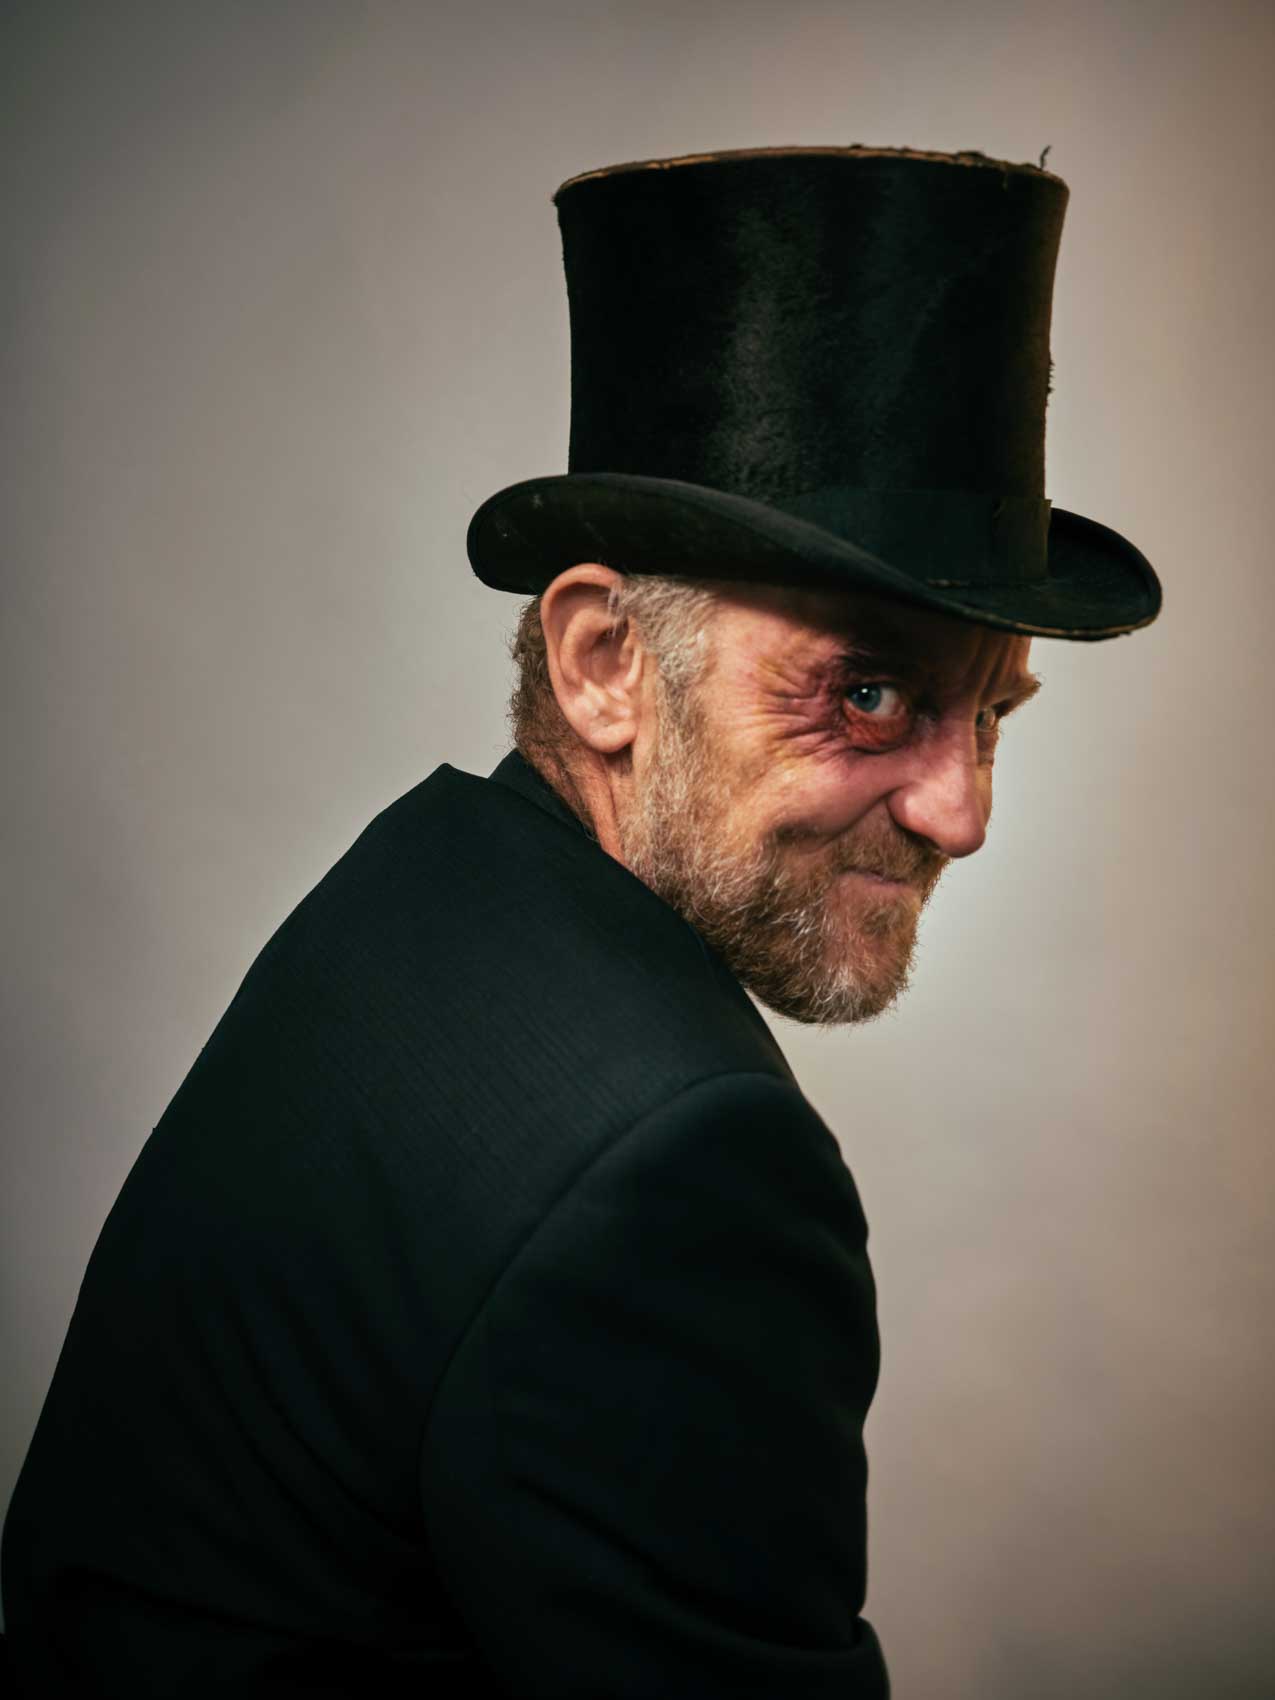 A Top Hat And A Black Eye